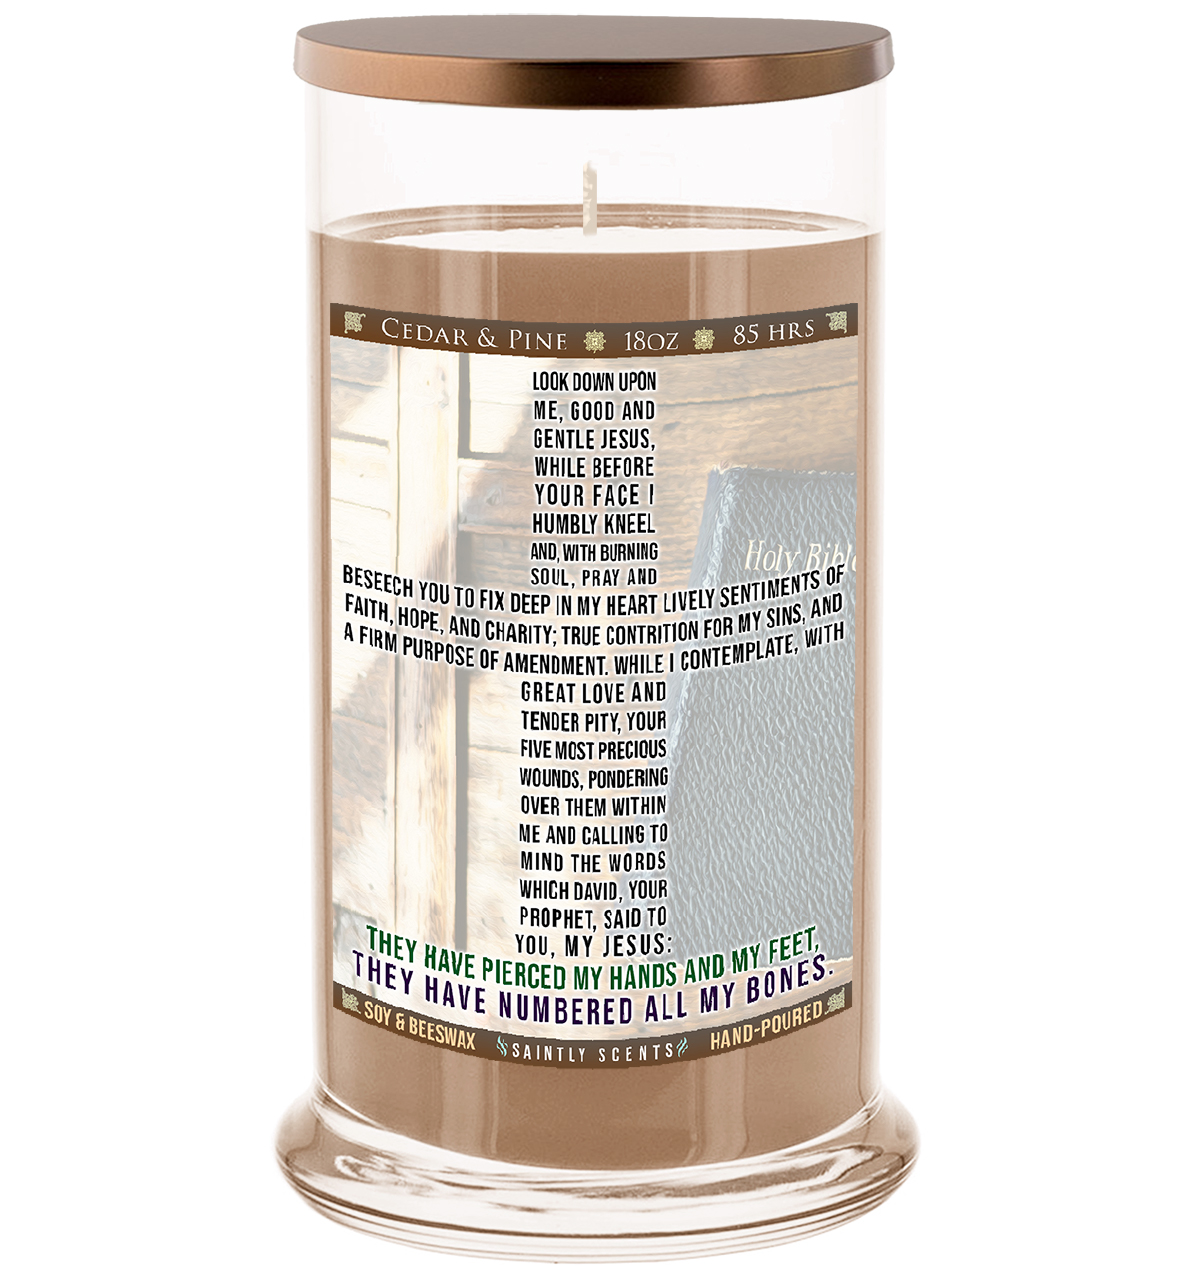 The Cross Scented Prayer Candle - Cedar and Pine